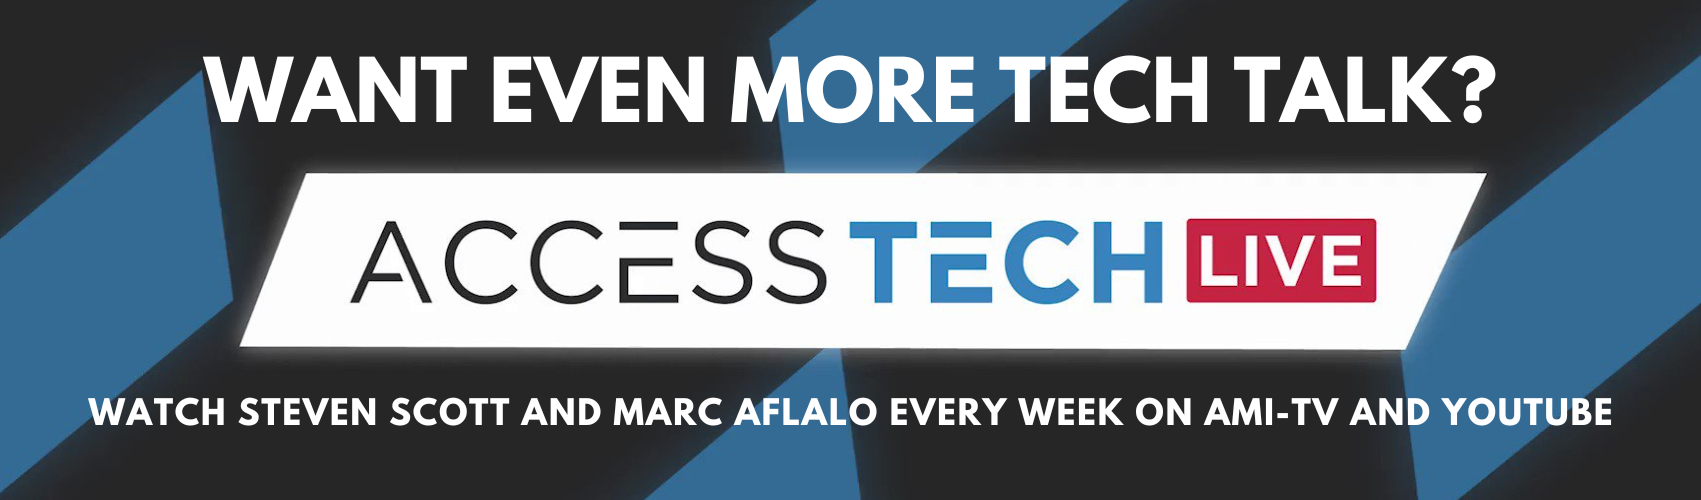 Want even more Tech Talk? Check out Access Tech Live with Steven Scott and Marc Aflalo every week on AMI-tv and on YouTube.